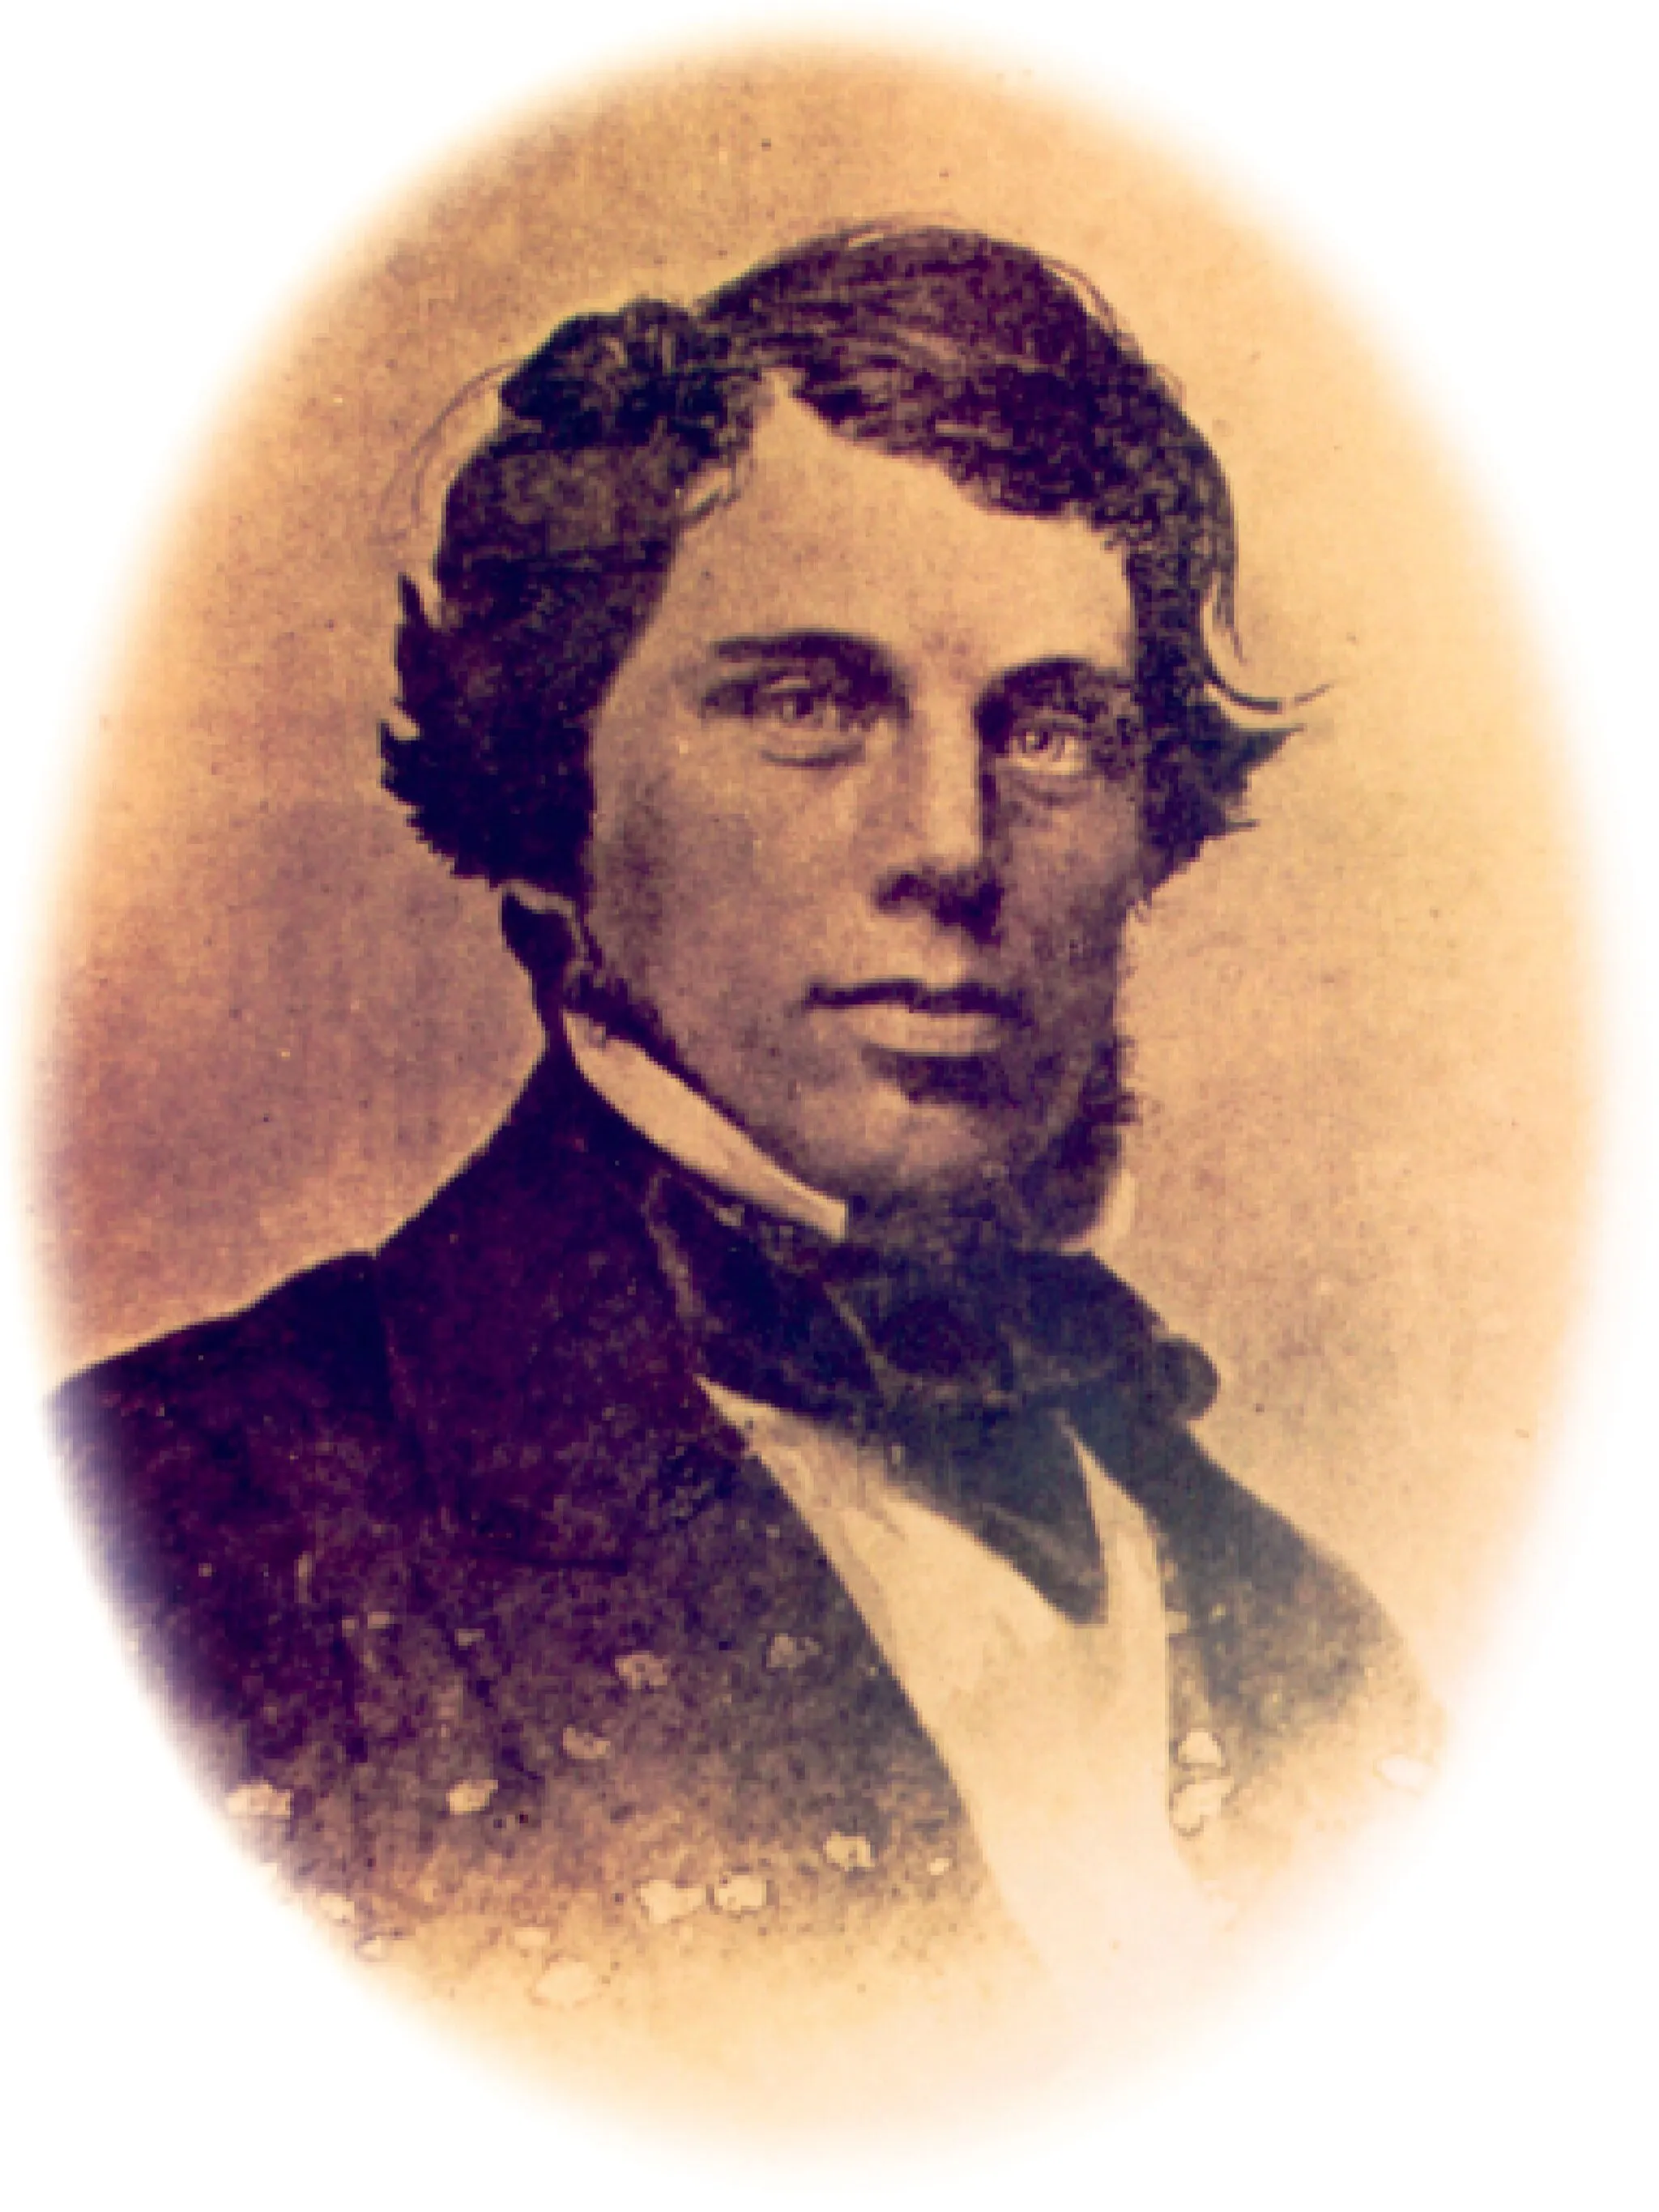 Photo showing: Photographic portrait of James McConnell, engineer